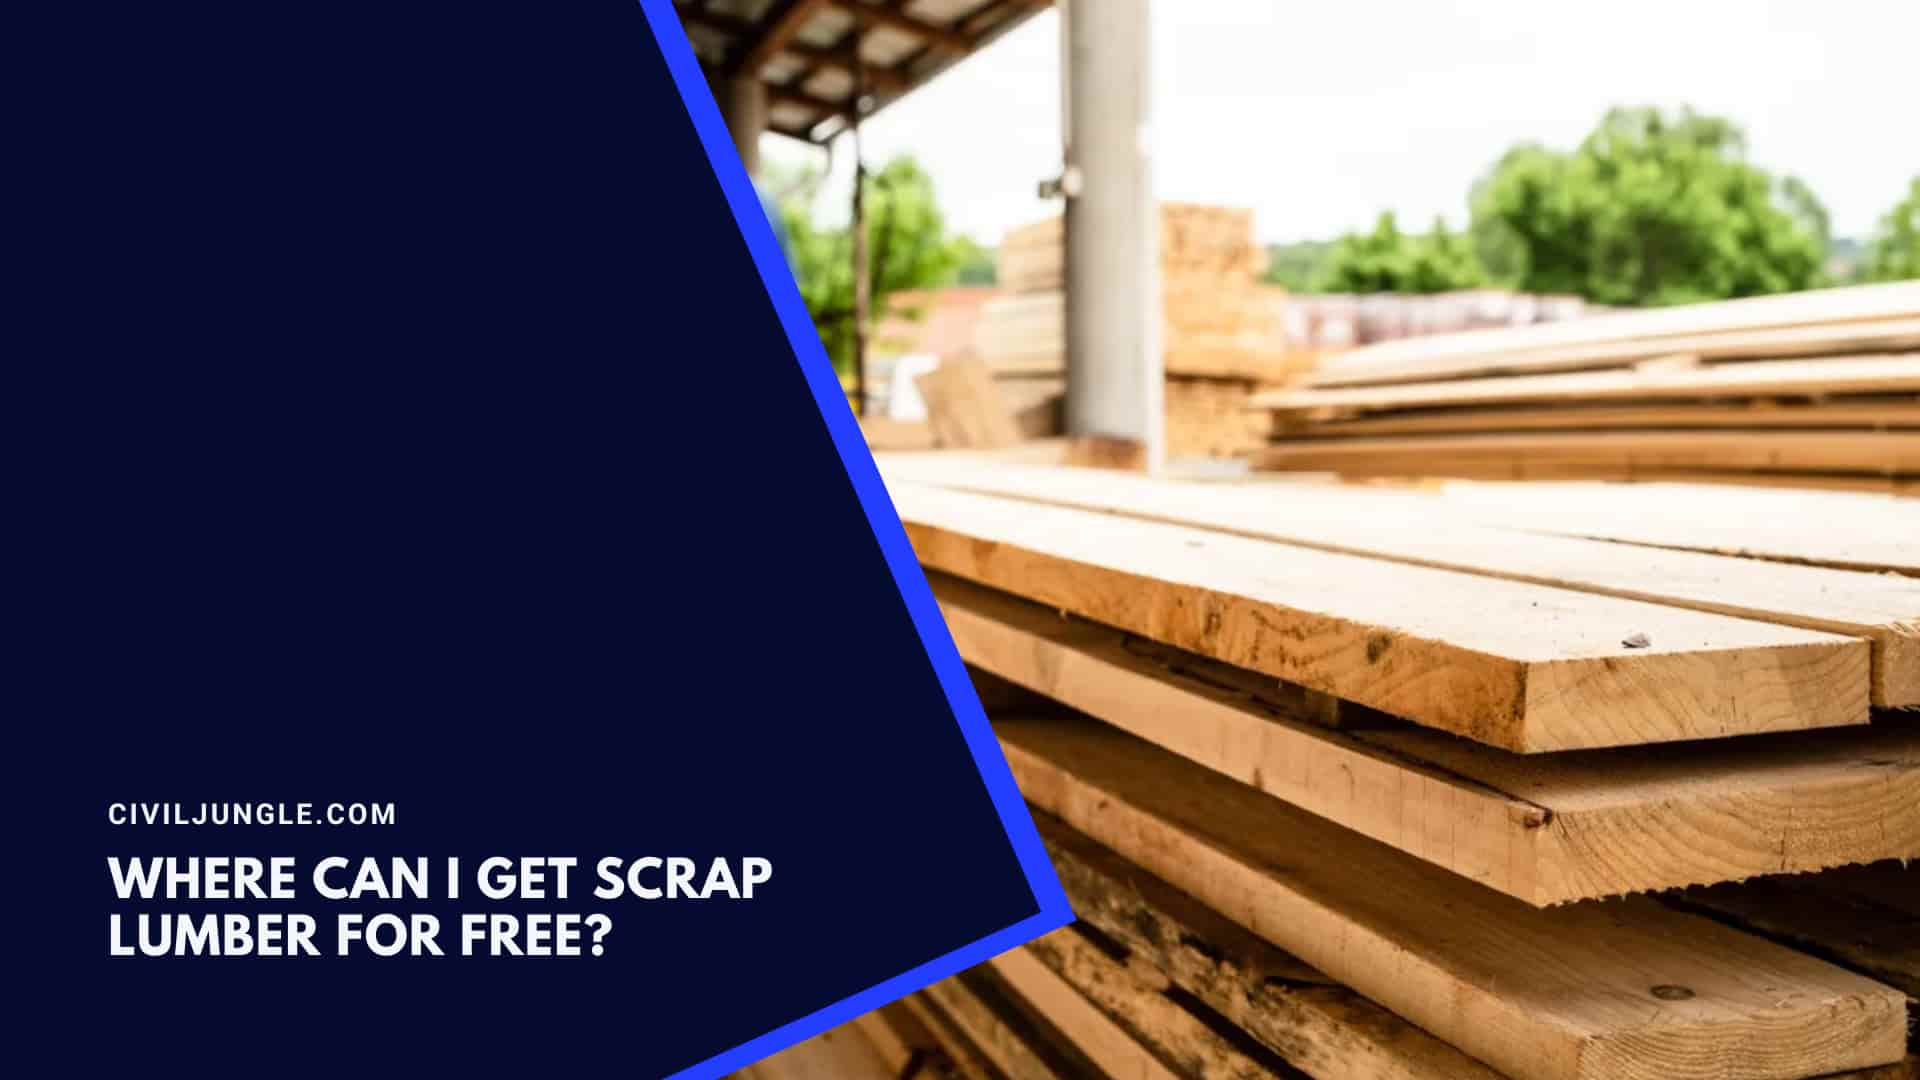 Where Can I Get Scrap Lumber for Free?